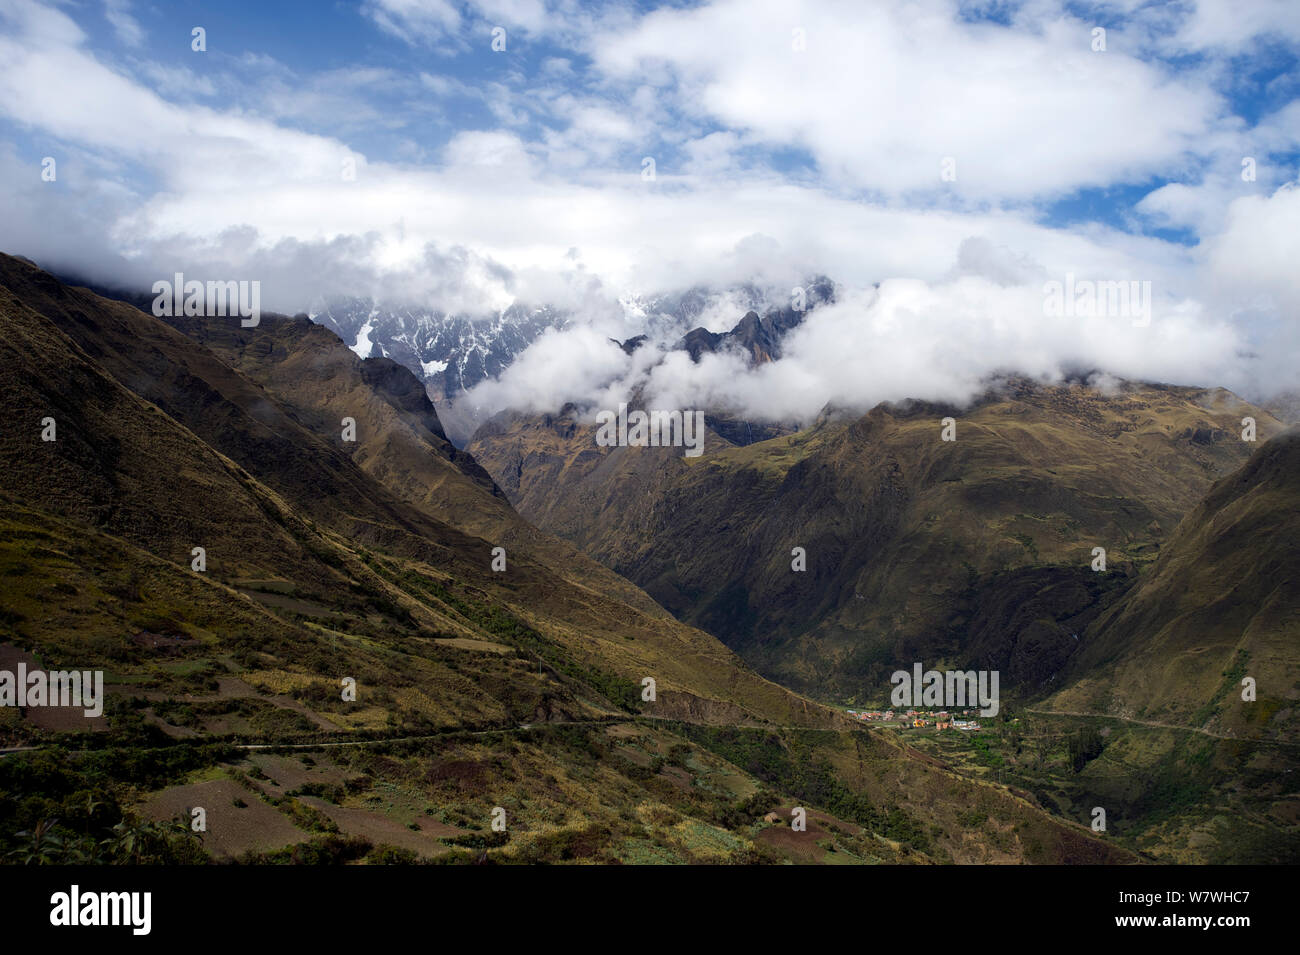 The village Totoral with Illimani Mountain partially obscured by clouds in the distance, High Andes, Bolivia, October 2013. Stock Photo